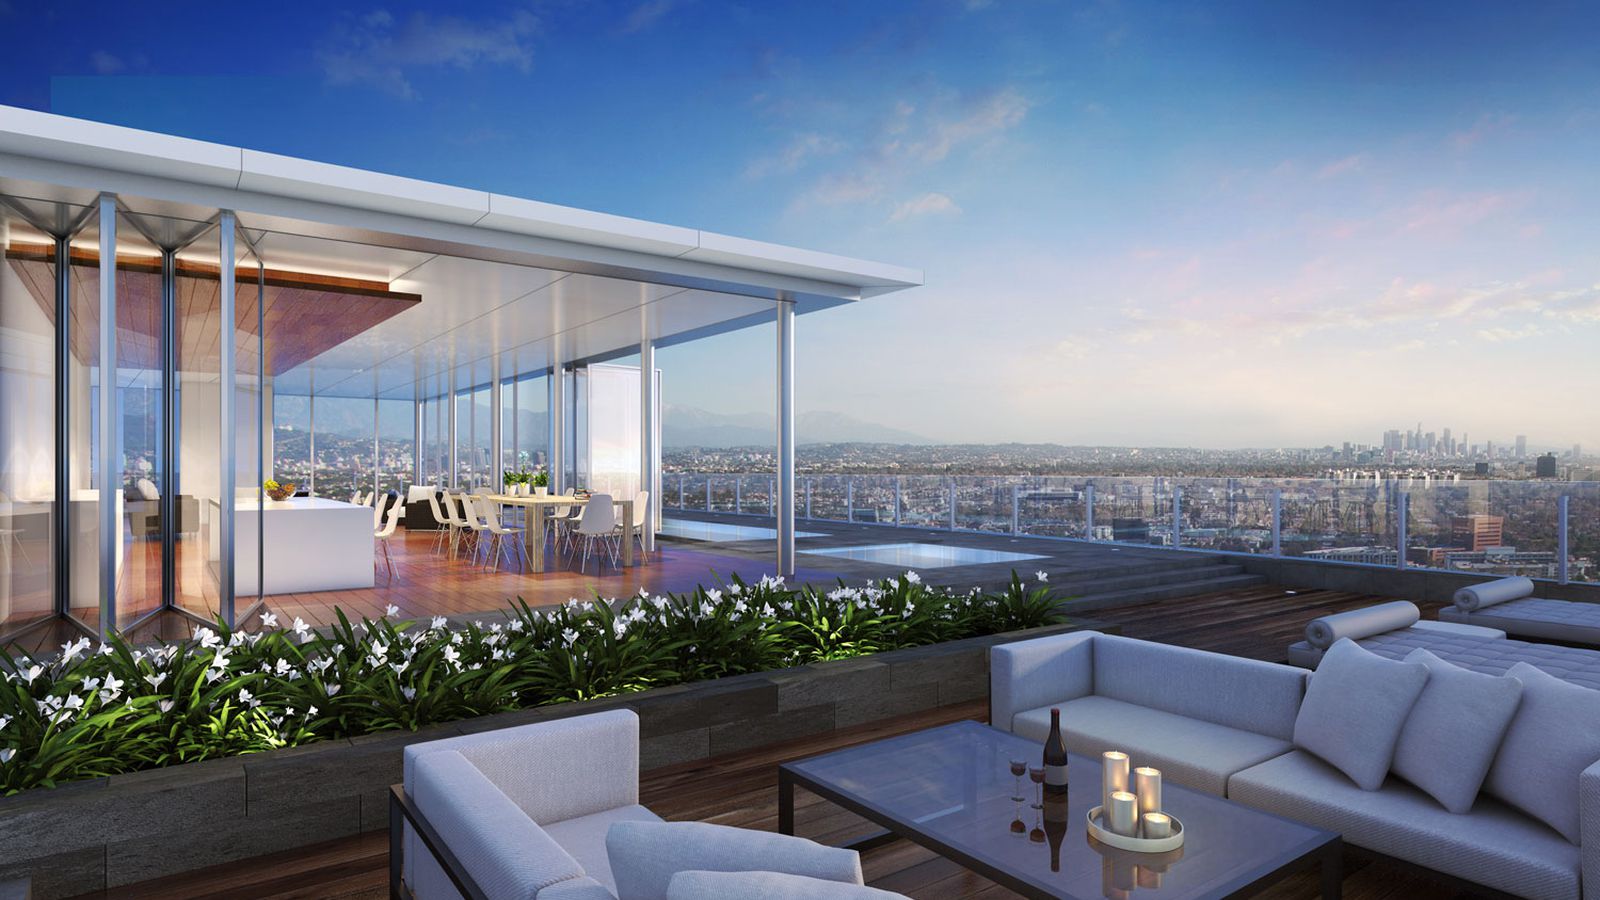 Basic steps for finding and buying the perfect penthouse in Israel